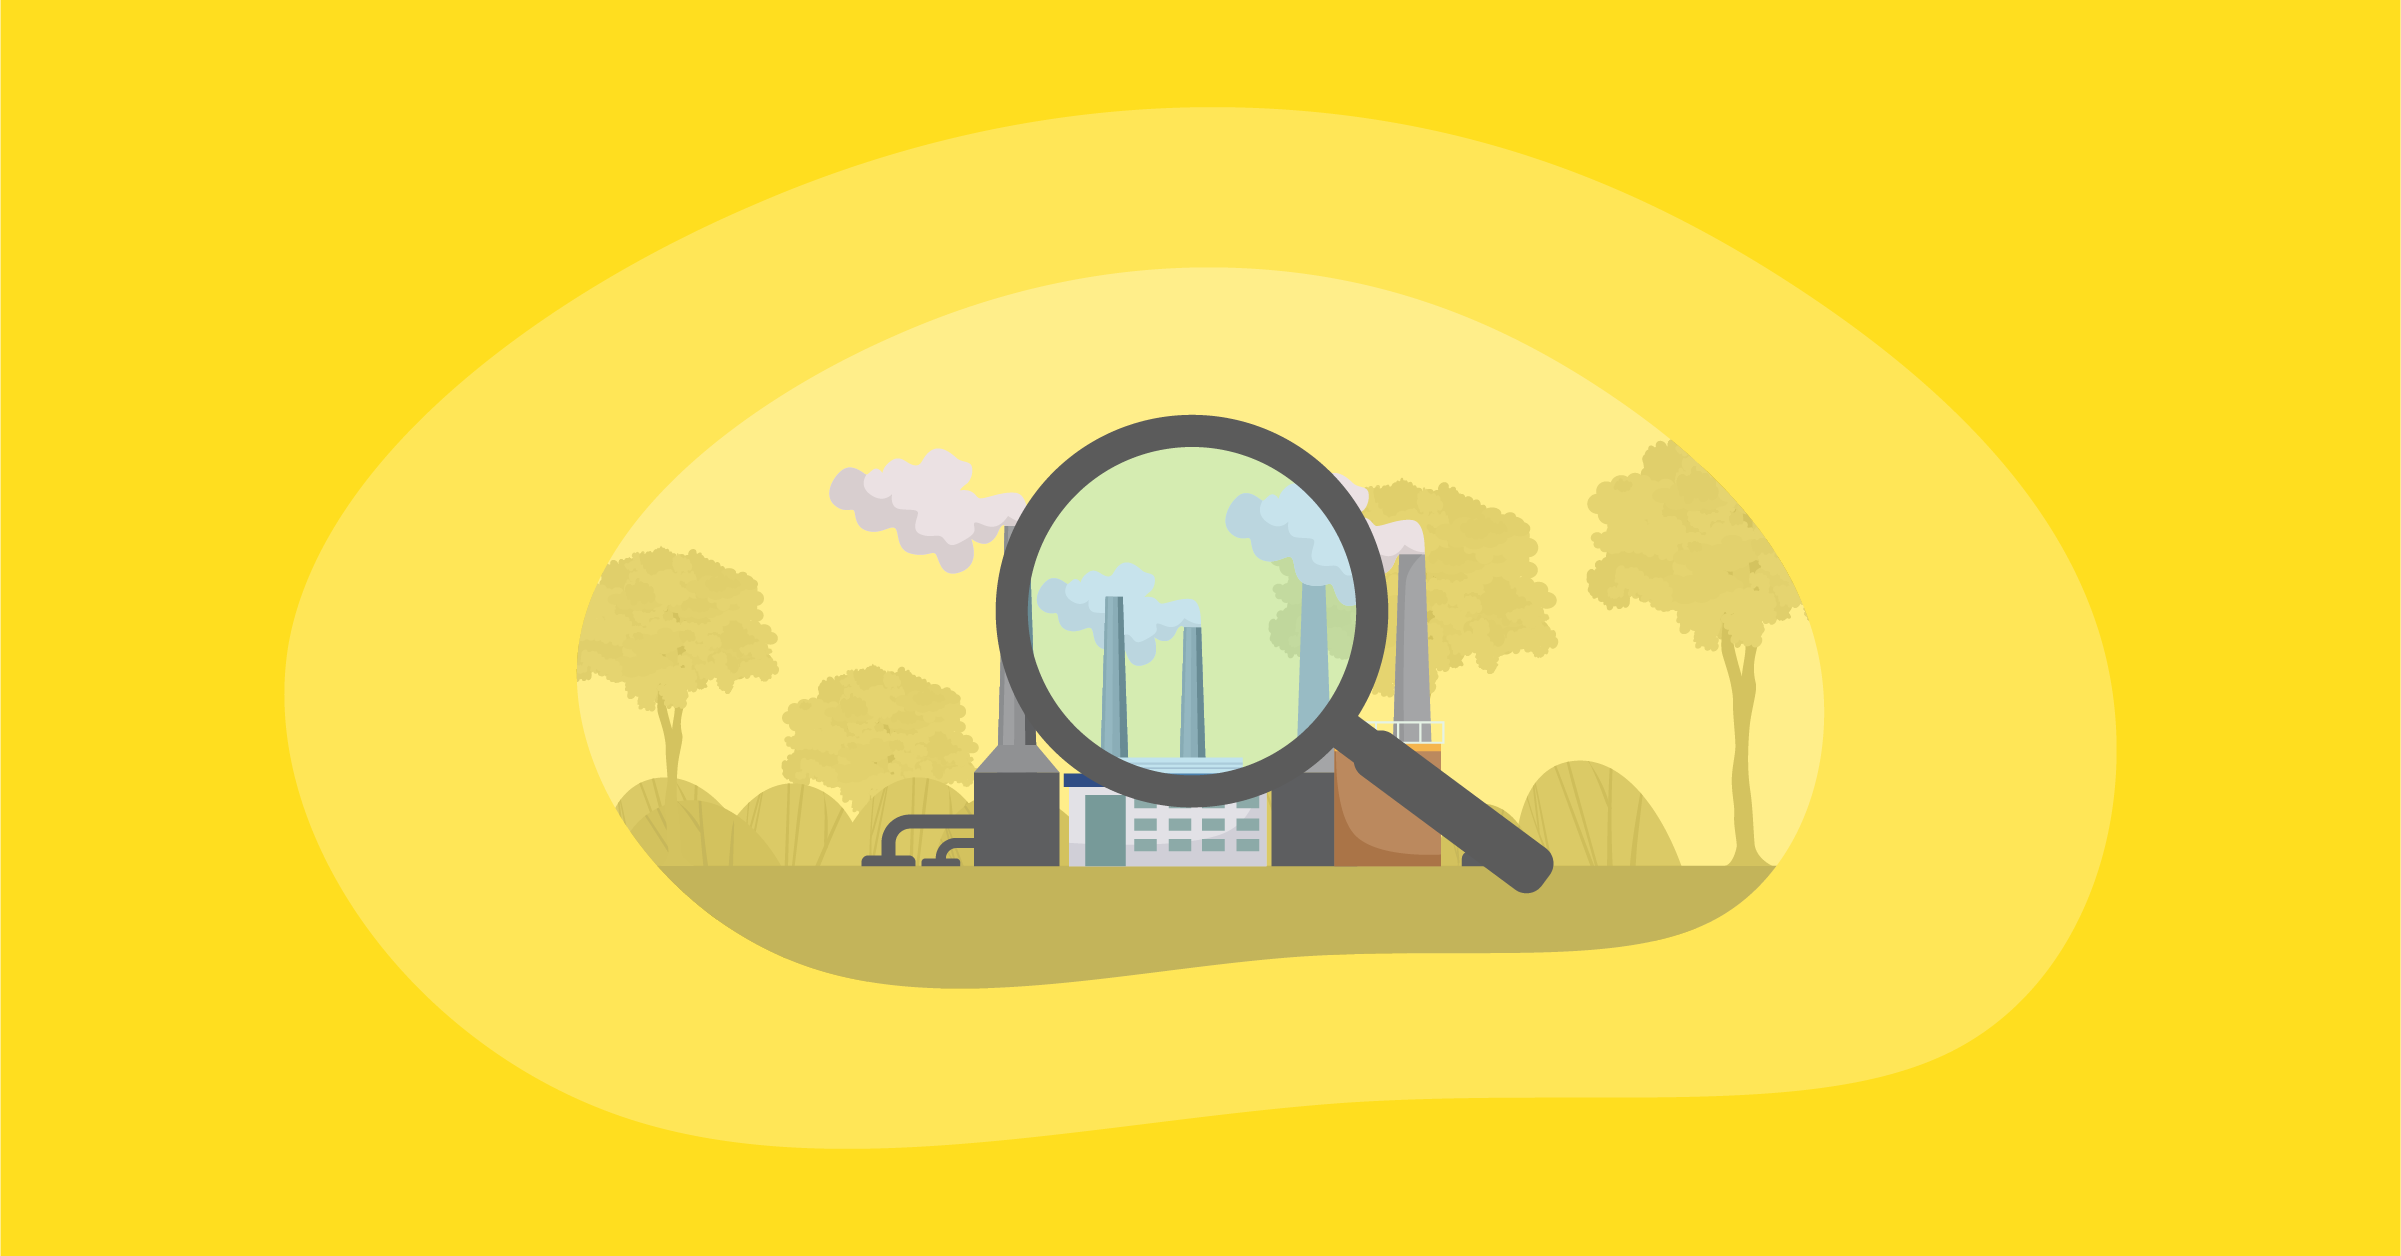 Illustration of geothermal power plant under a magnifying glass